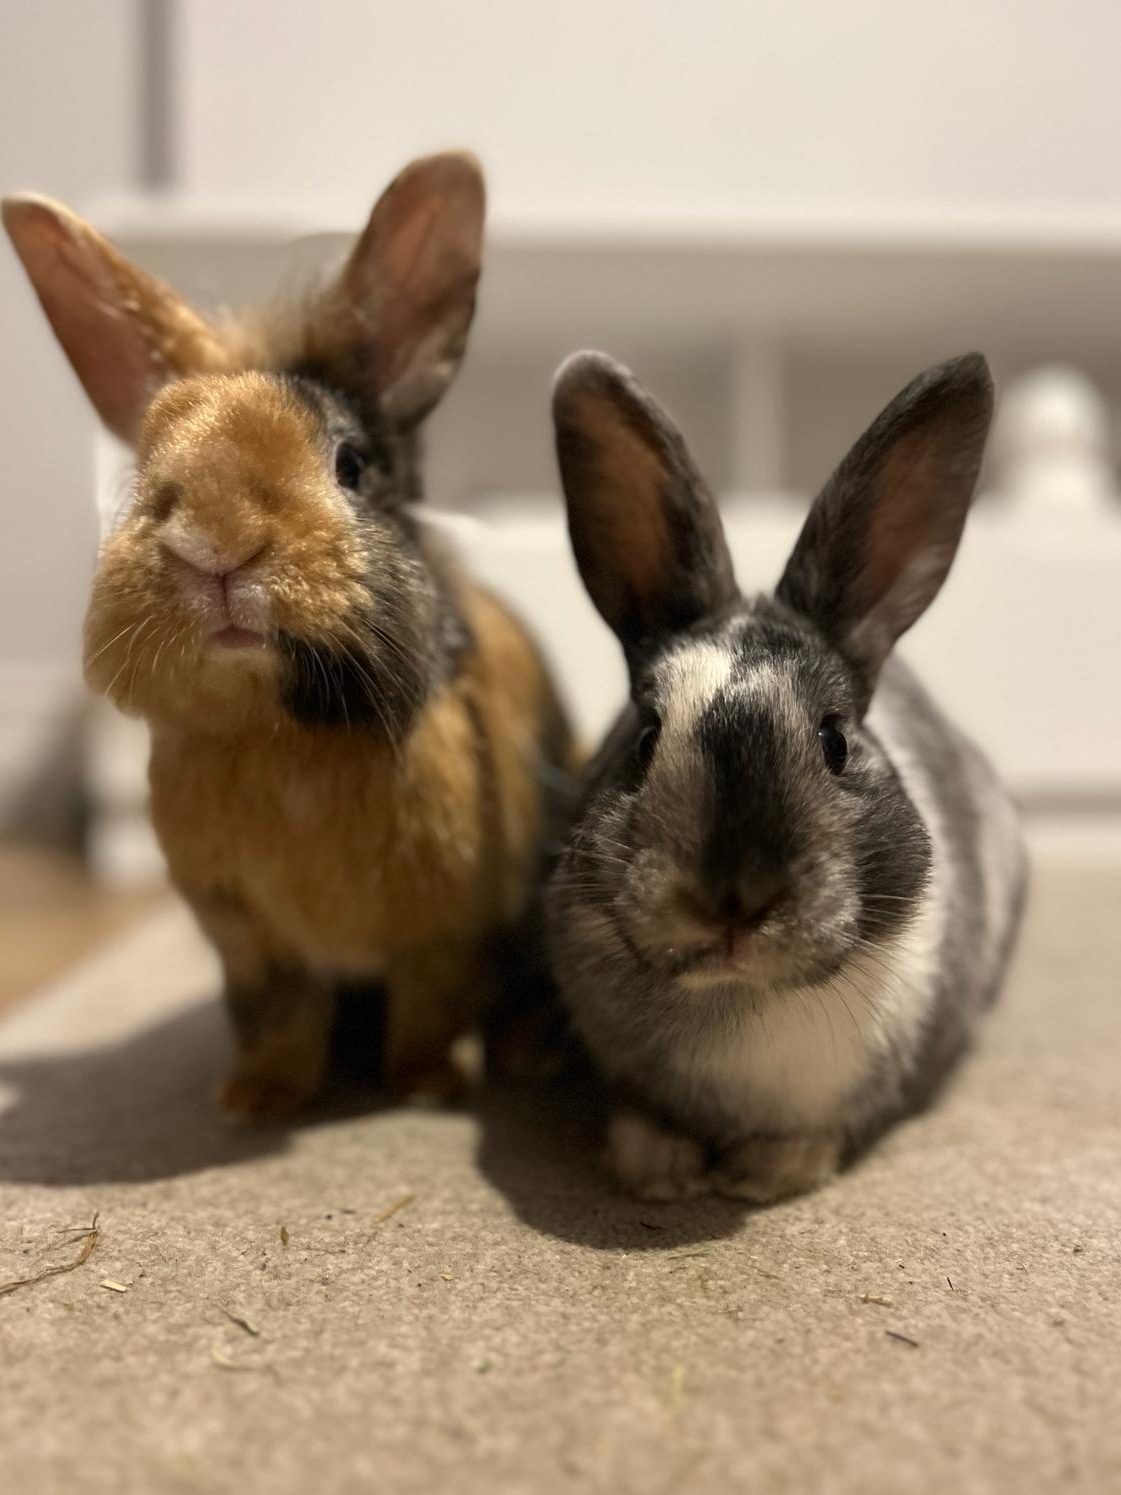 The picture shows two rabbits that have graduated the RSPCA Manchester and Salford rabbit bonding scheme. The left rabbit stands whilst peeing curiously at the camera. The rabbit is a predominantly ginger  with a dark brown patch to the right side of it's  face. The rabbit to the right sits closely to the other rabbit, also facing the camera. It is white with dark splotches across the entirety of it's body and face. 